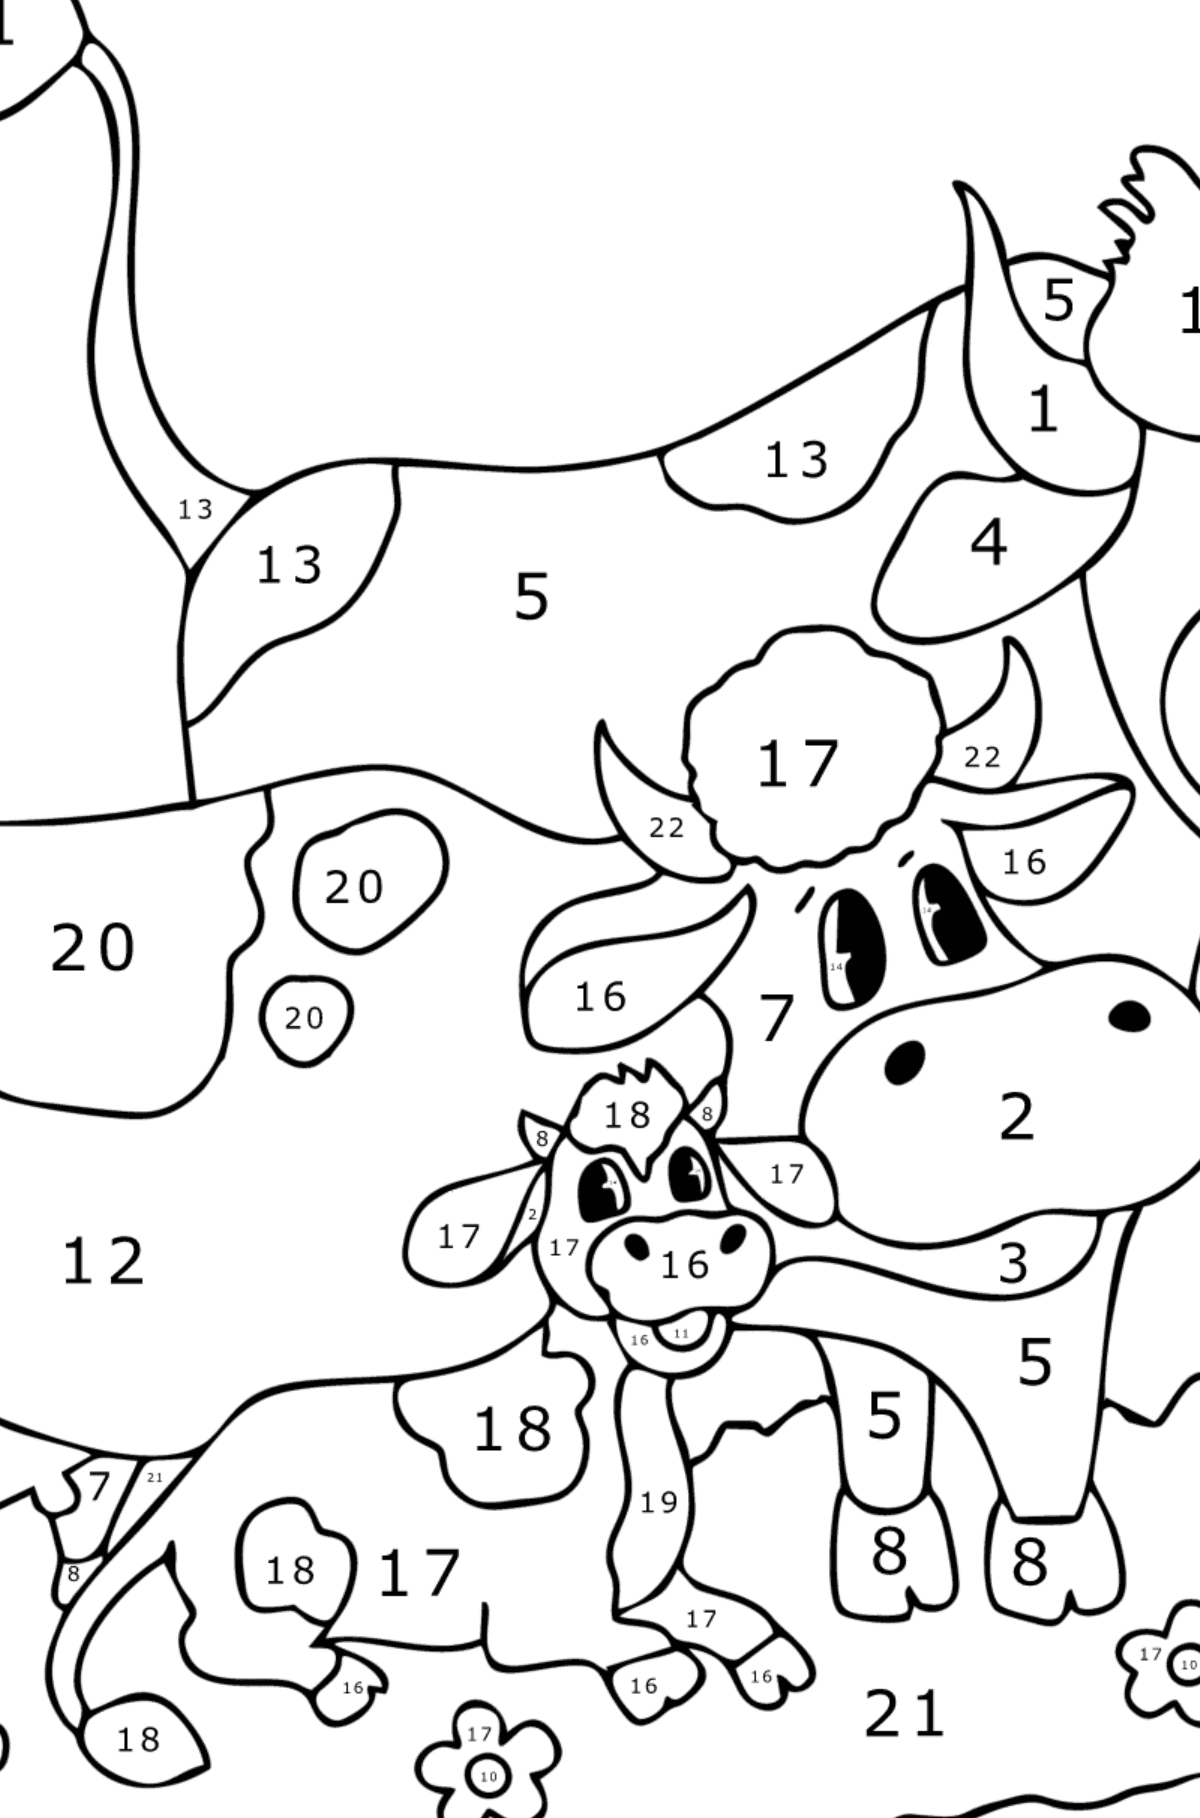 Cow, bull and calf coloring page - Coloring by Numbers for Kids